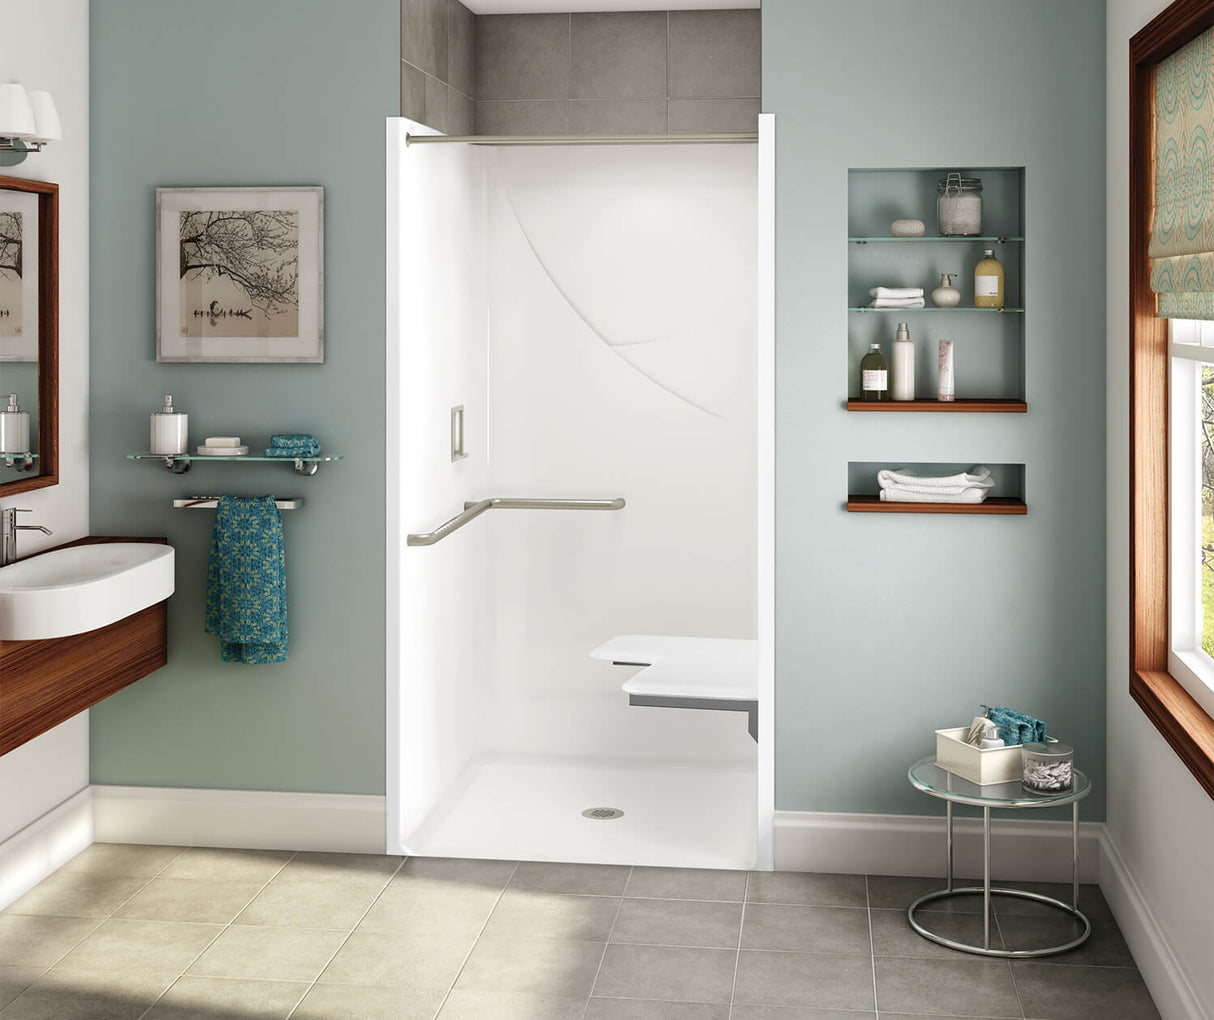 Aker OPS-3636 RRF AcrylX Alcove Center Drain One-Piece Shower in Sterling Silver - ADA Grab Bar and Seat